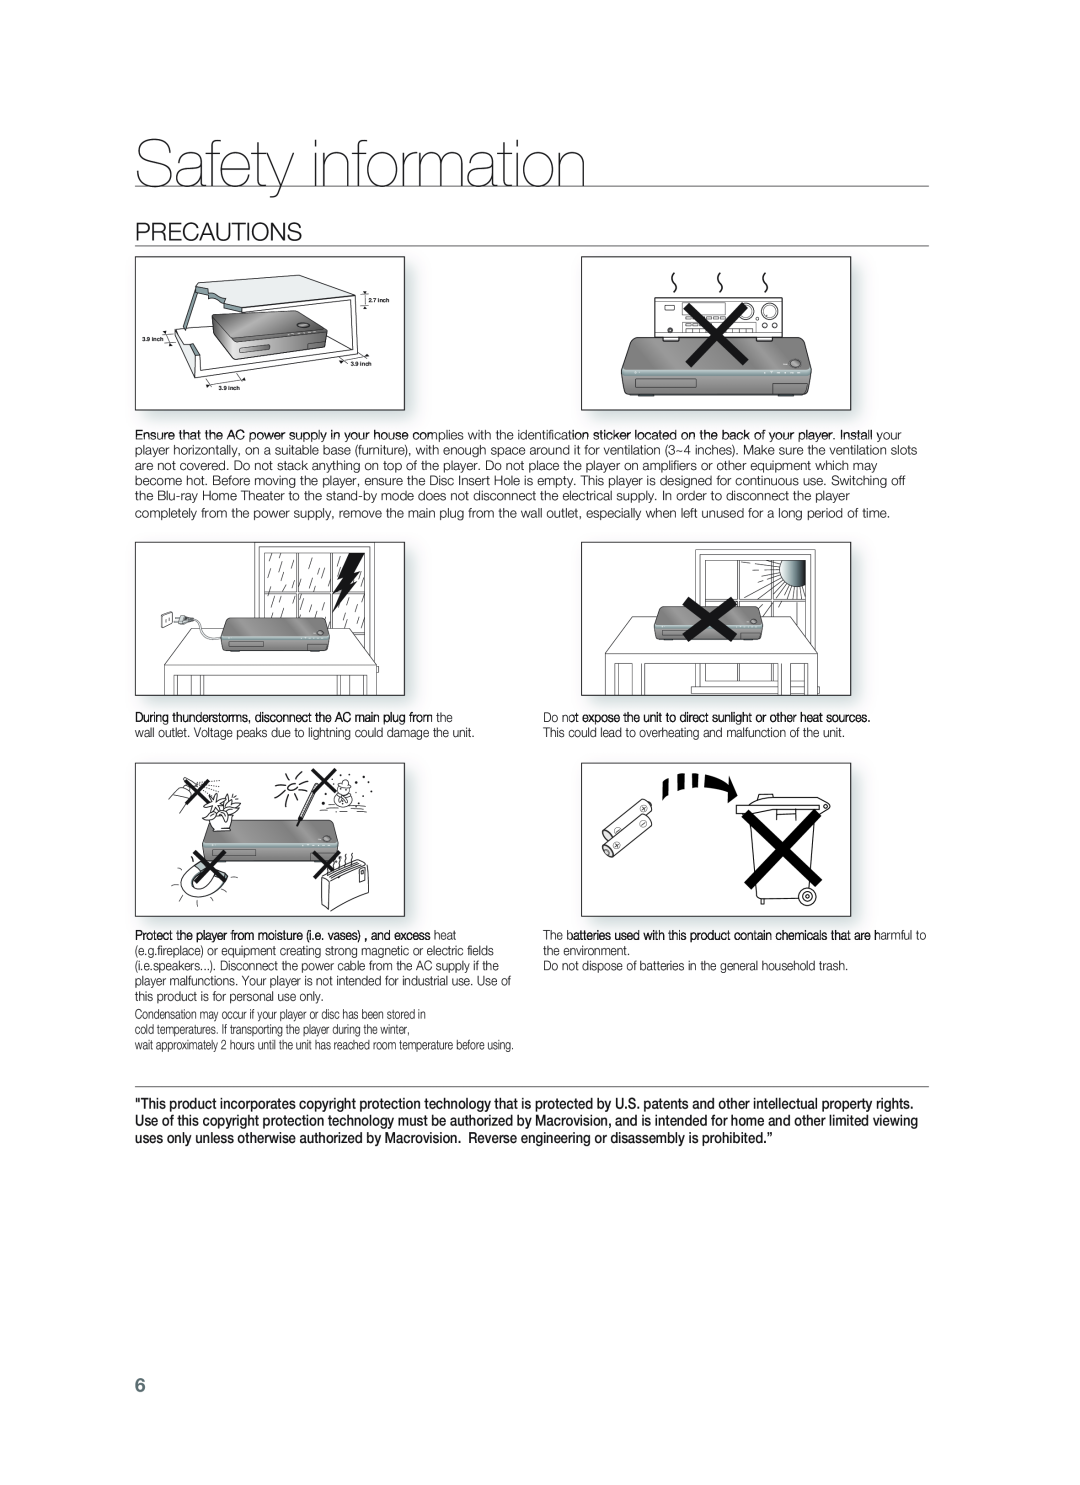 Samsung HT-BD1255, HT-BD1252 user manual Precautions, Safety information, inch 3.9 inch 3.9 inch 3.9 inch 